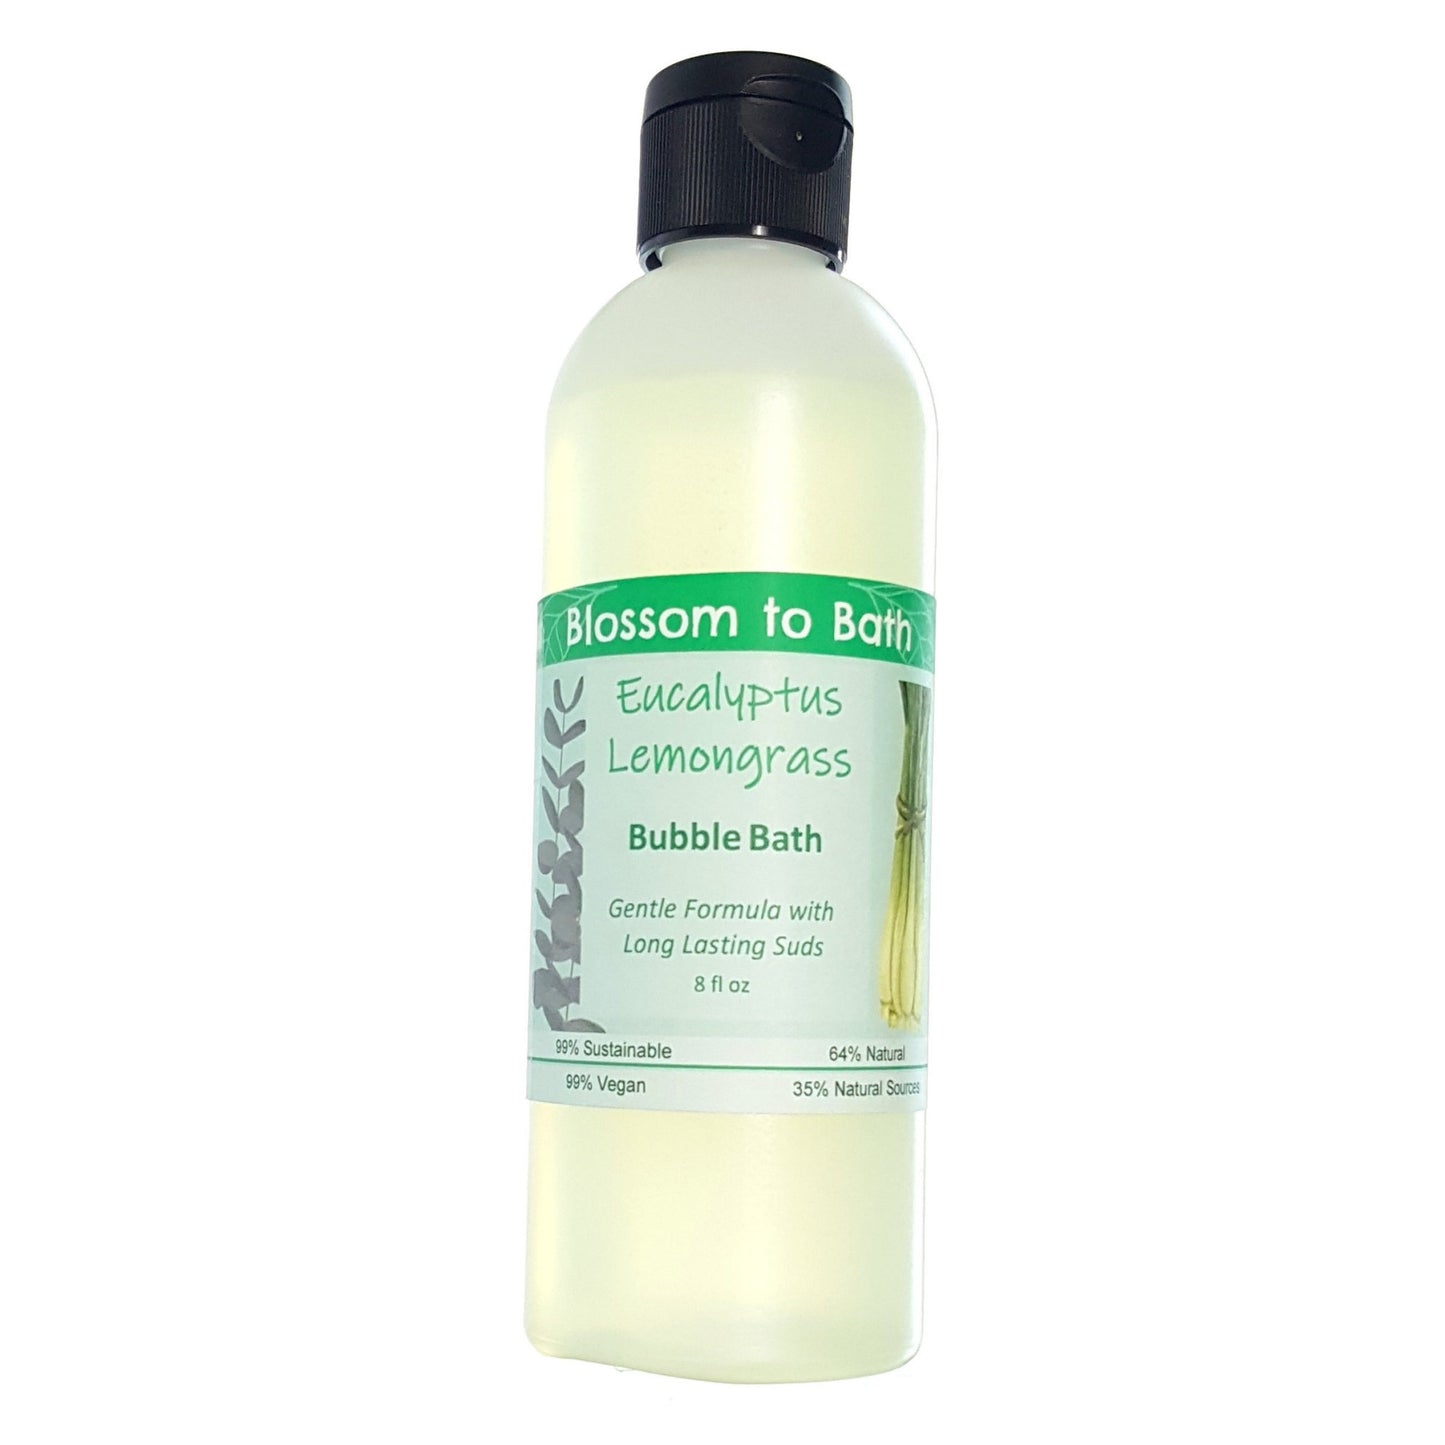 Buy Blossom to Bath Eucalyptus Lemongrass Bubble Bath from Flowersong Soap Studio.  Lively, long lasting  bubbles in a gentle plant based formula for maximum relaxation time  Fresh, sweet herbally clean scent of lemongrass and bracing Eucalyptus.